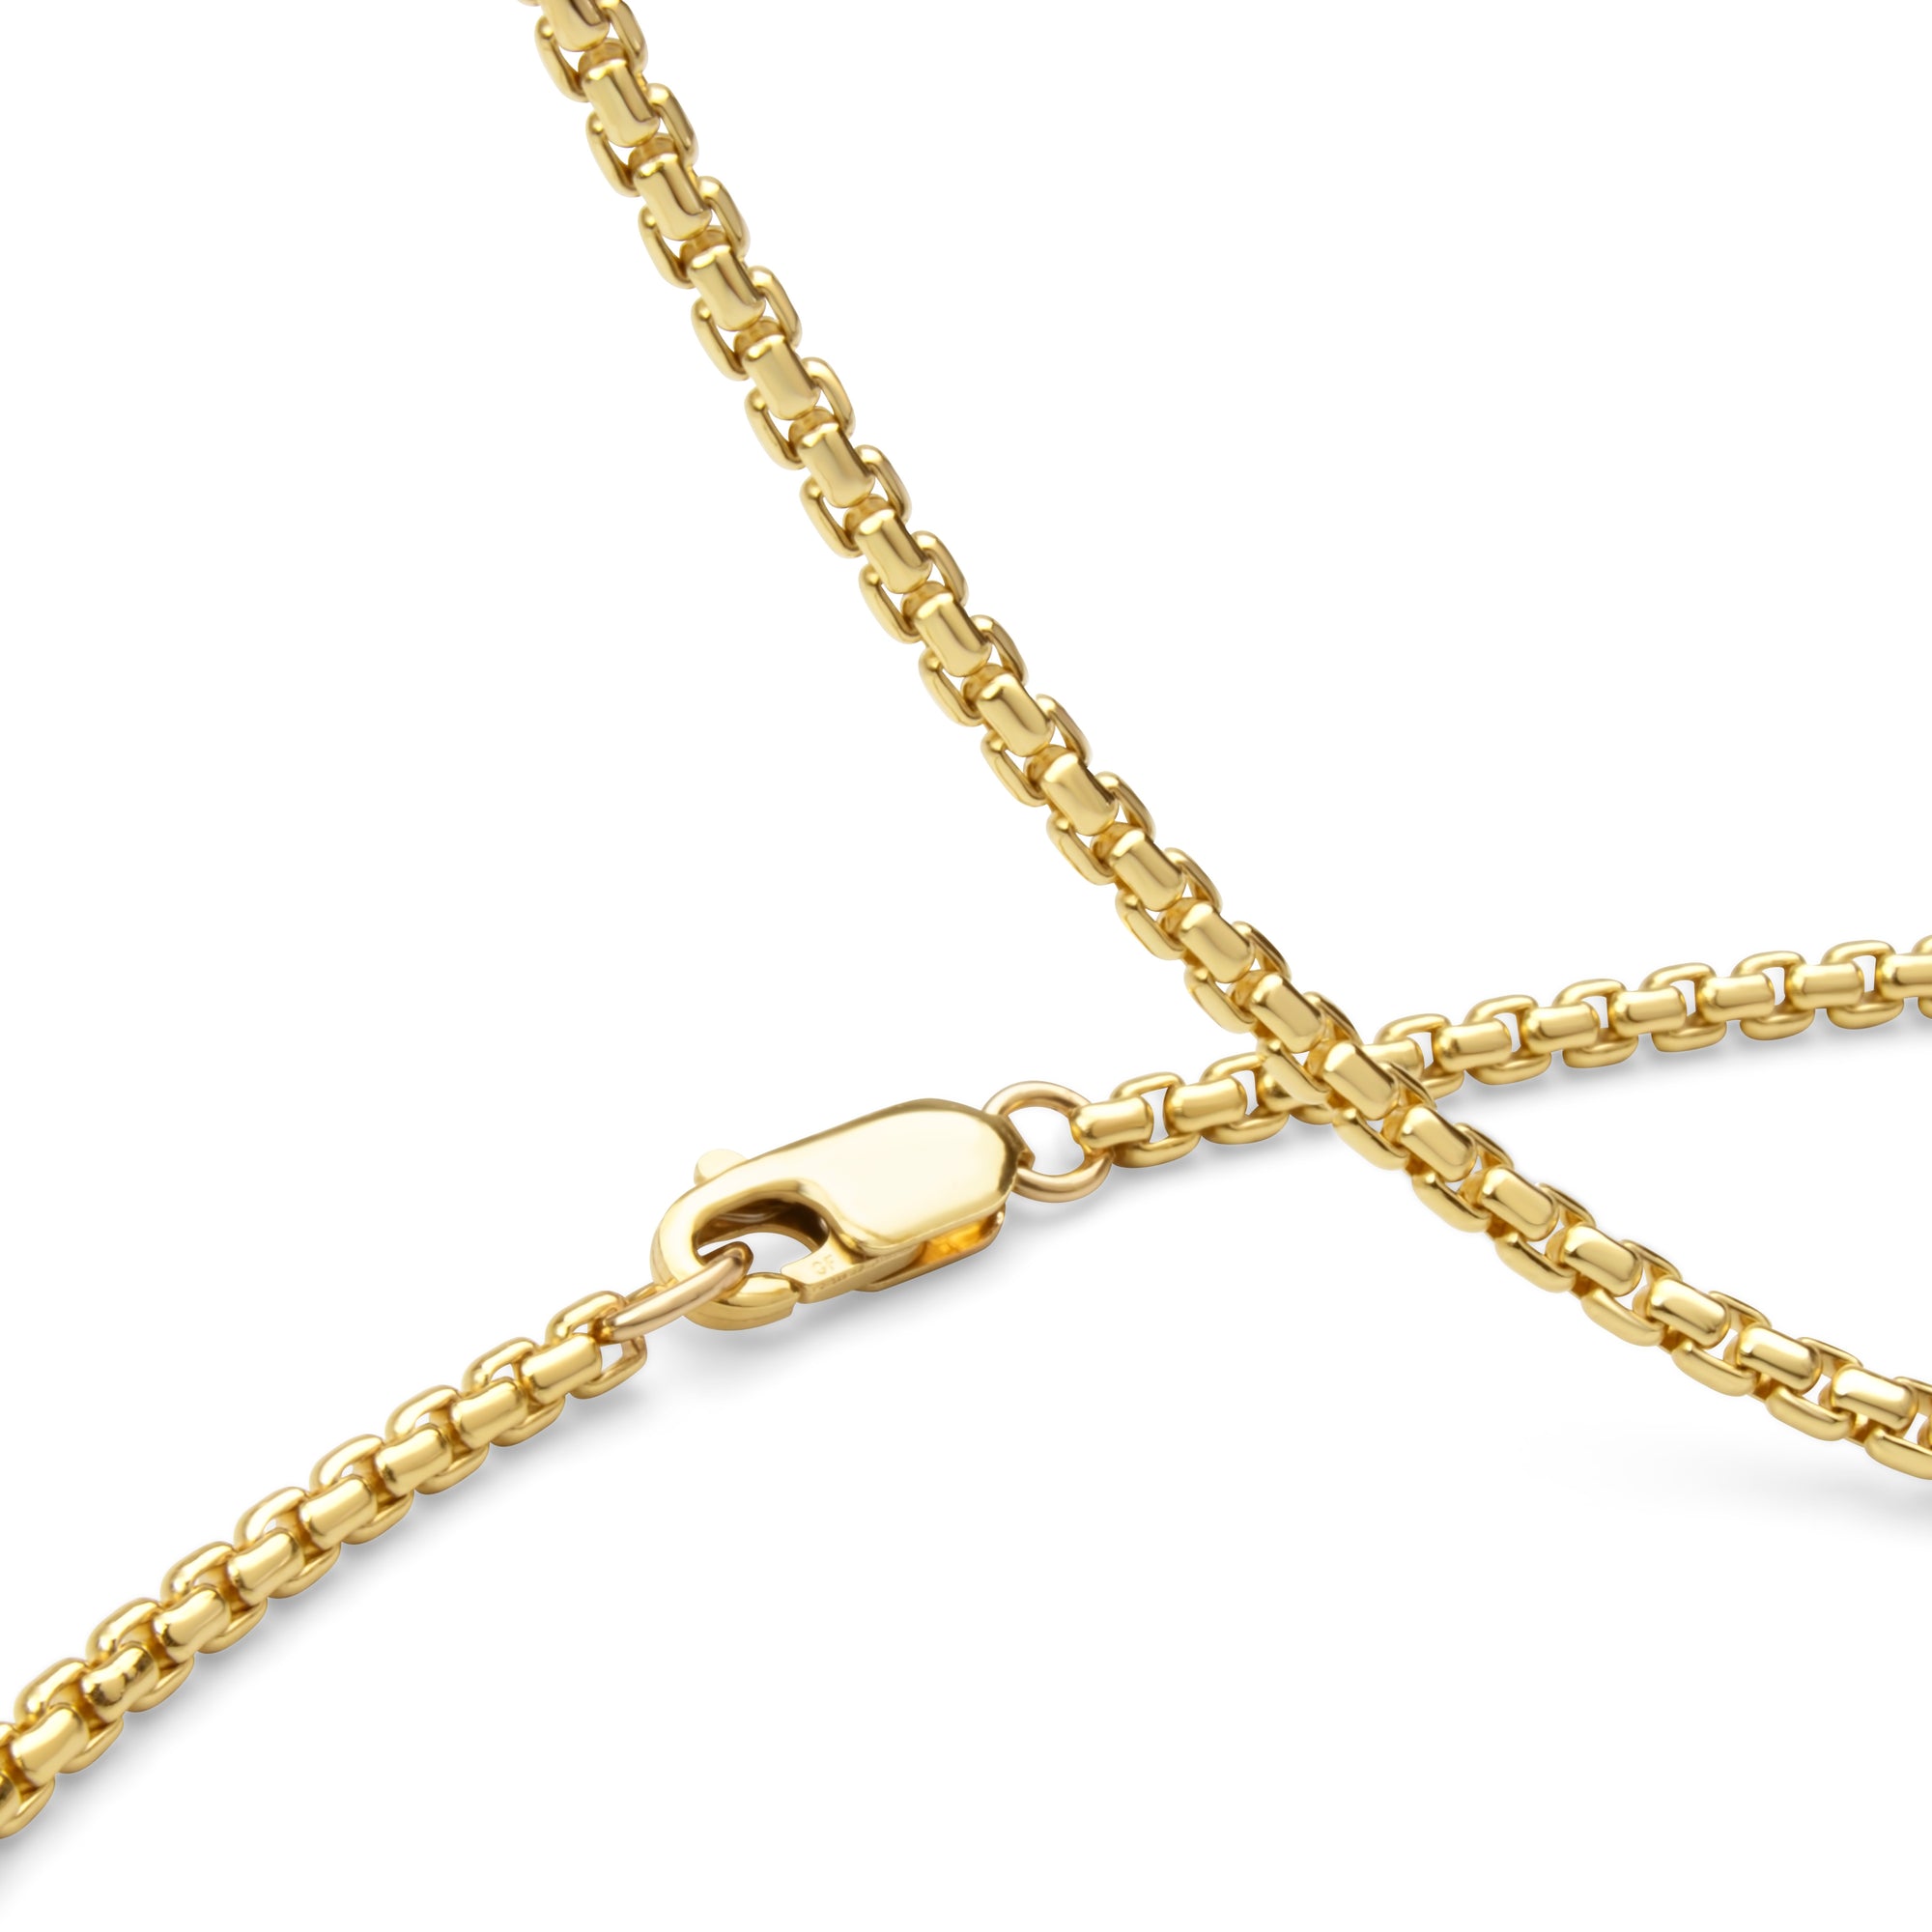 2.5mm Gold-Filled Rounded Box Chain